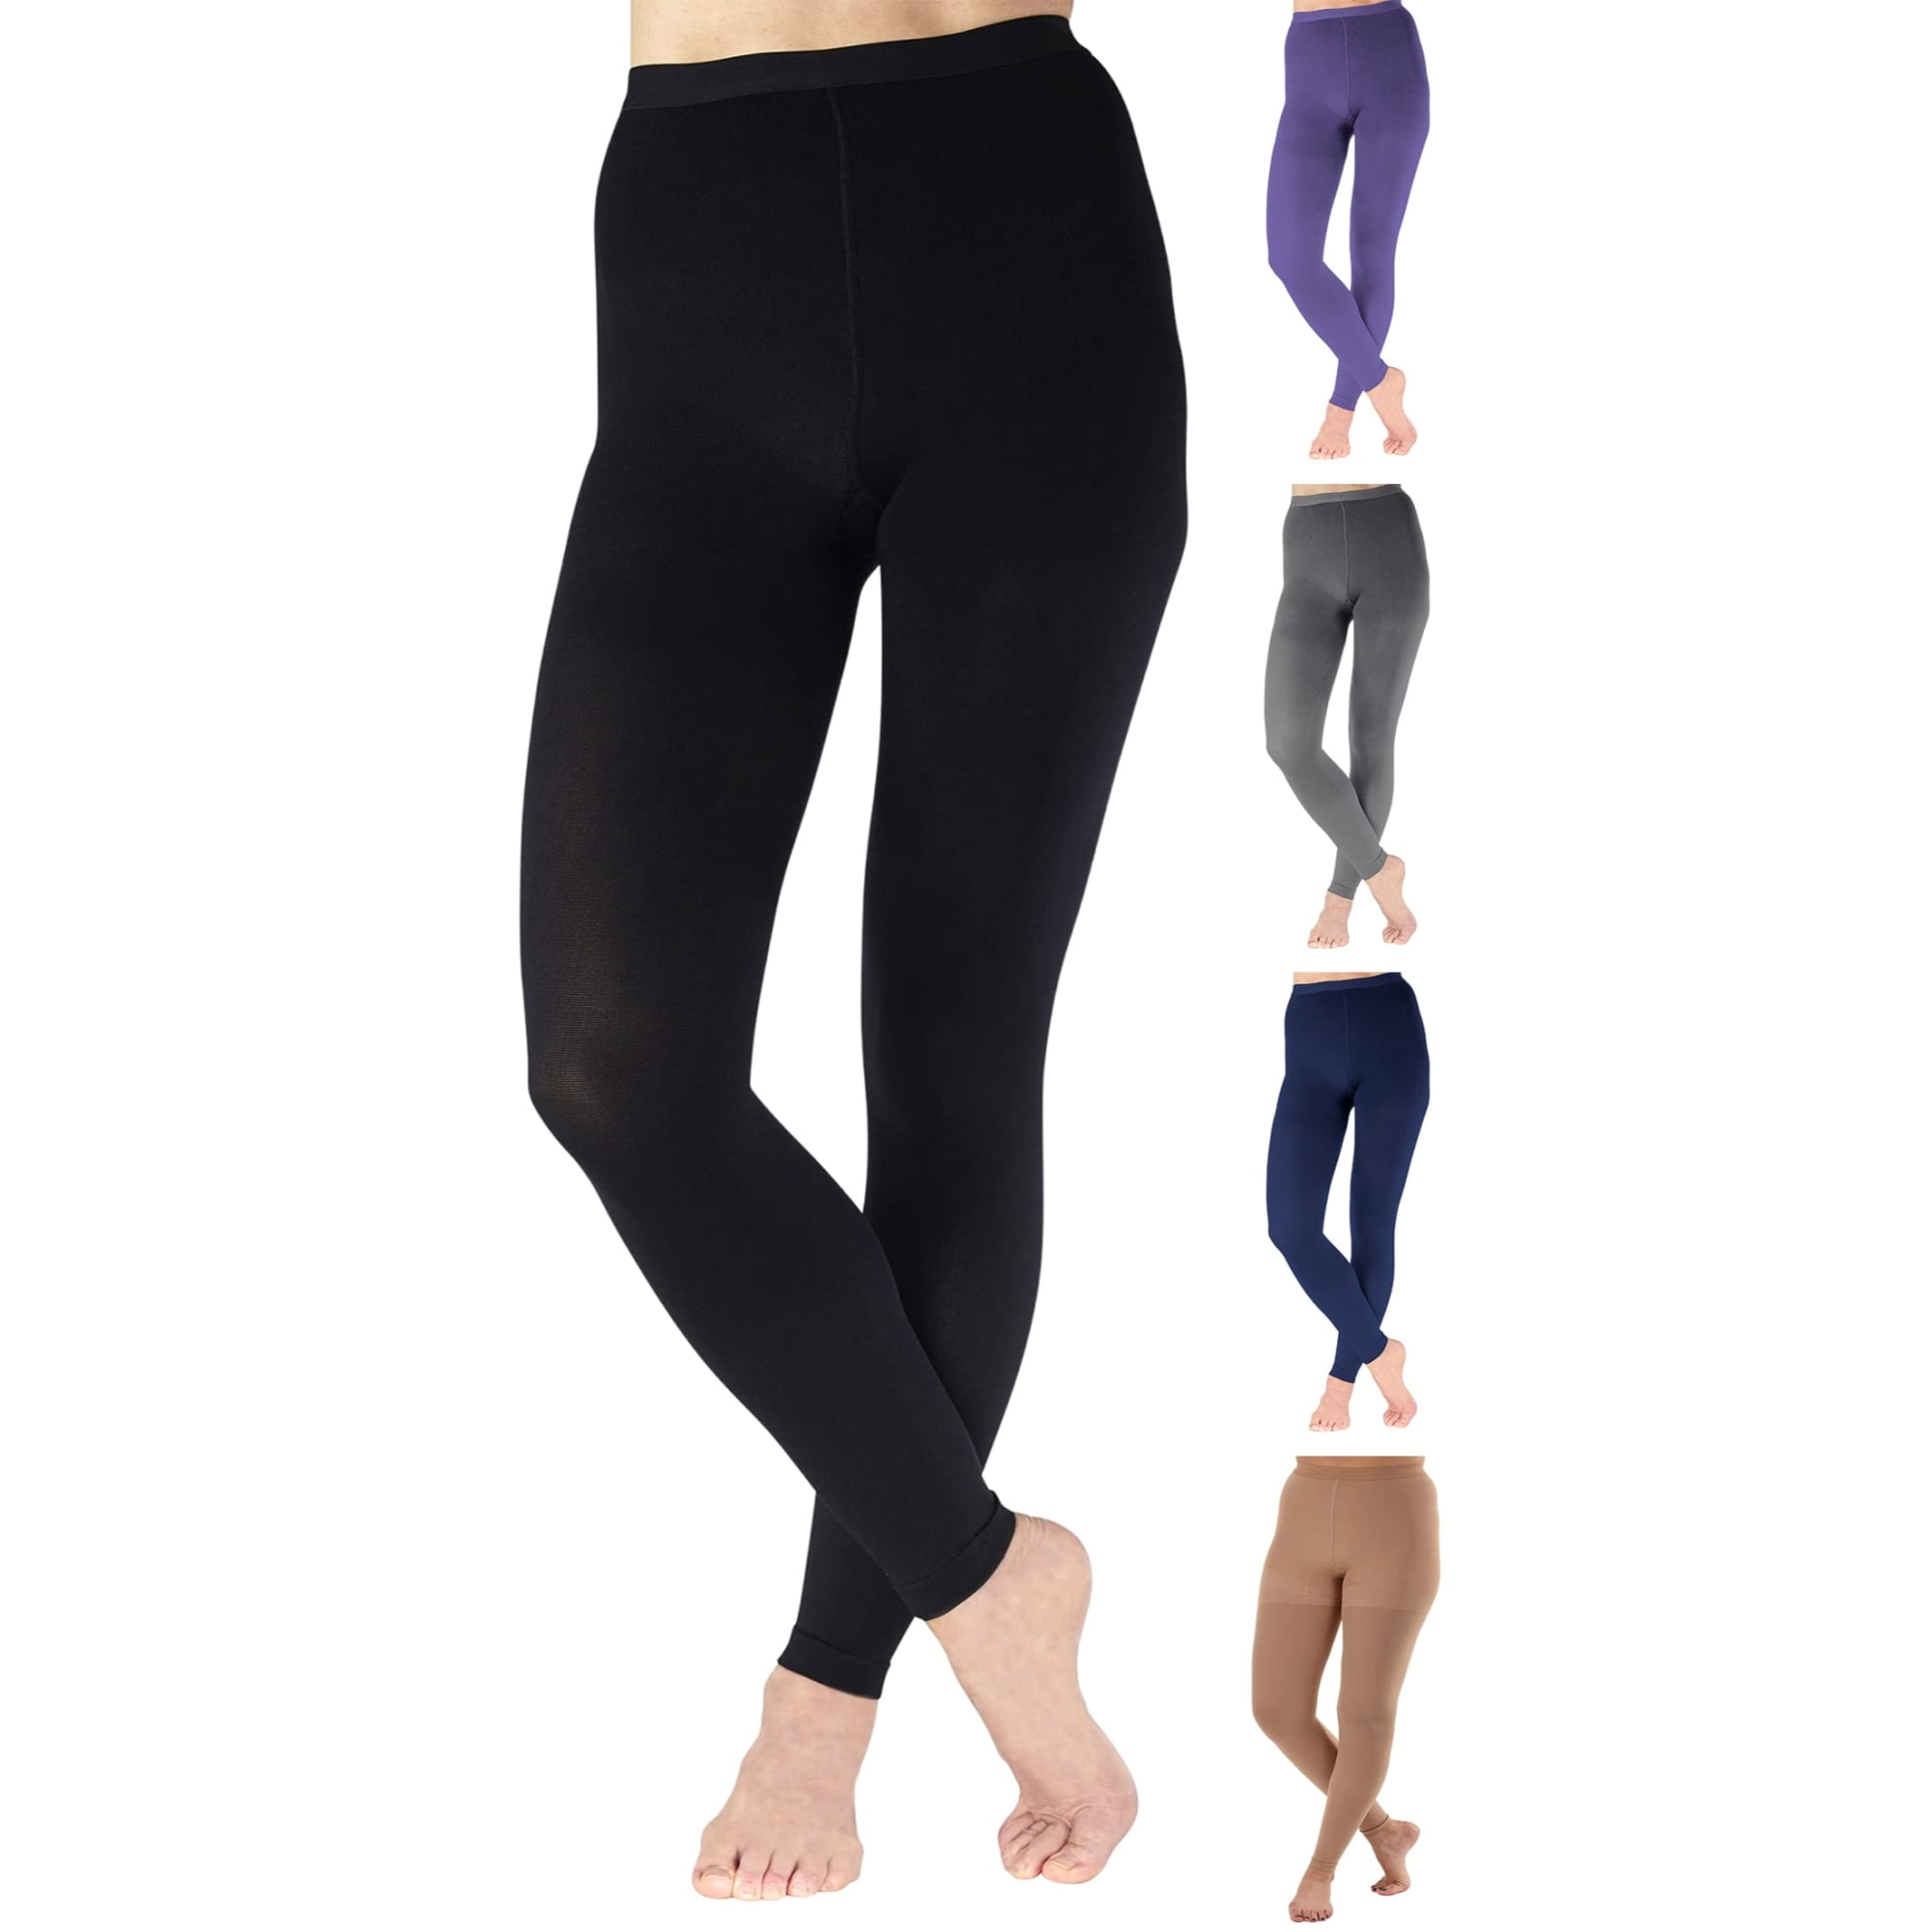 4XL Extra Wide Compression Leggings for Women 20-30mmHg - Black